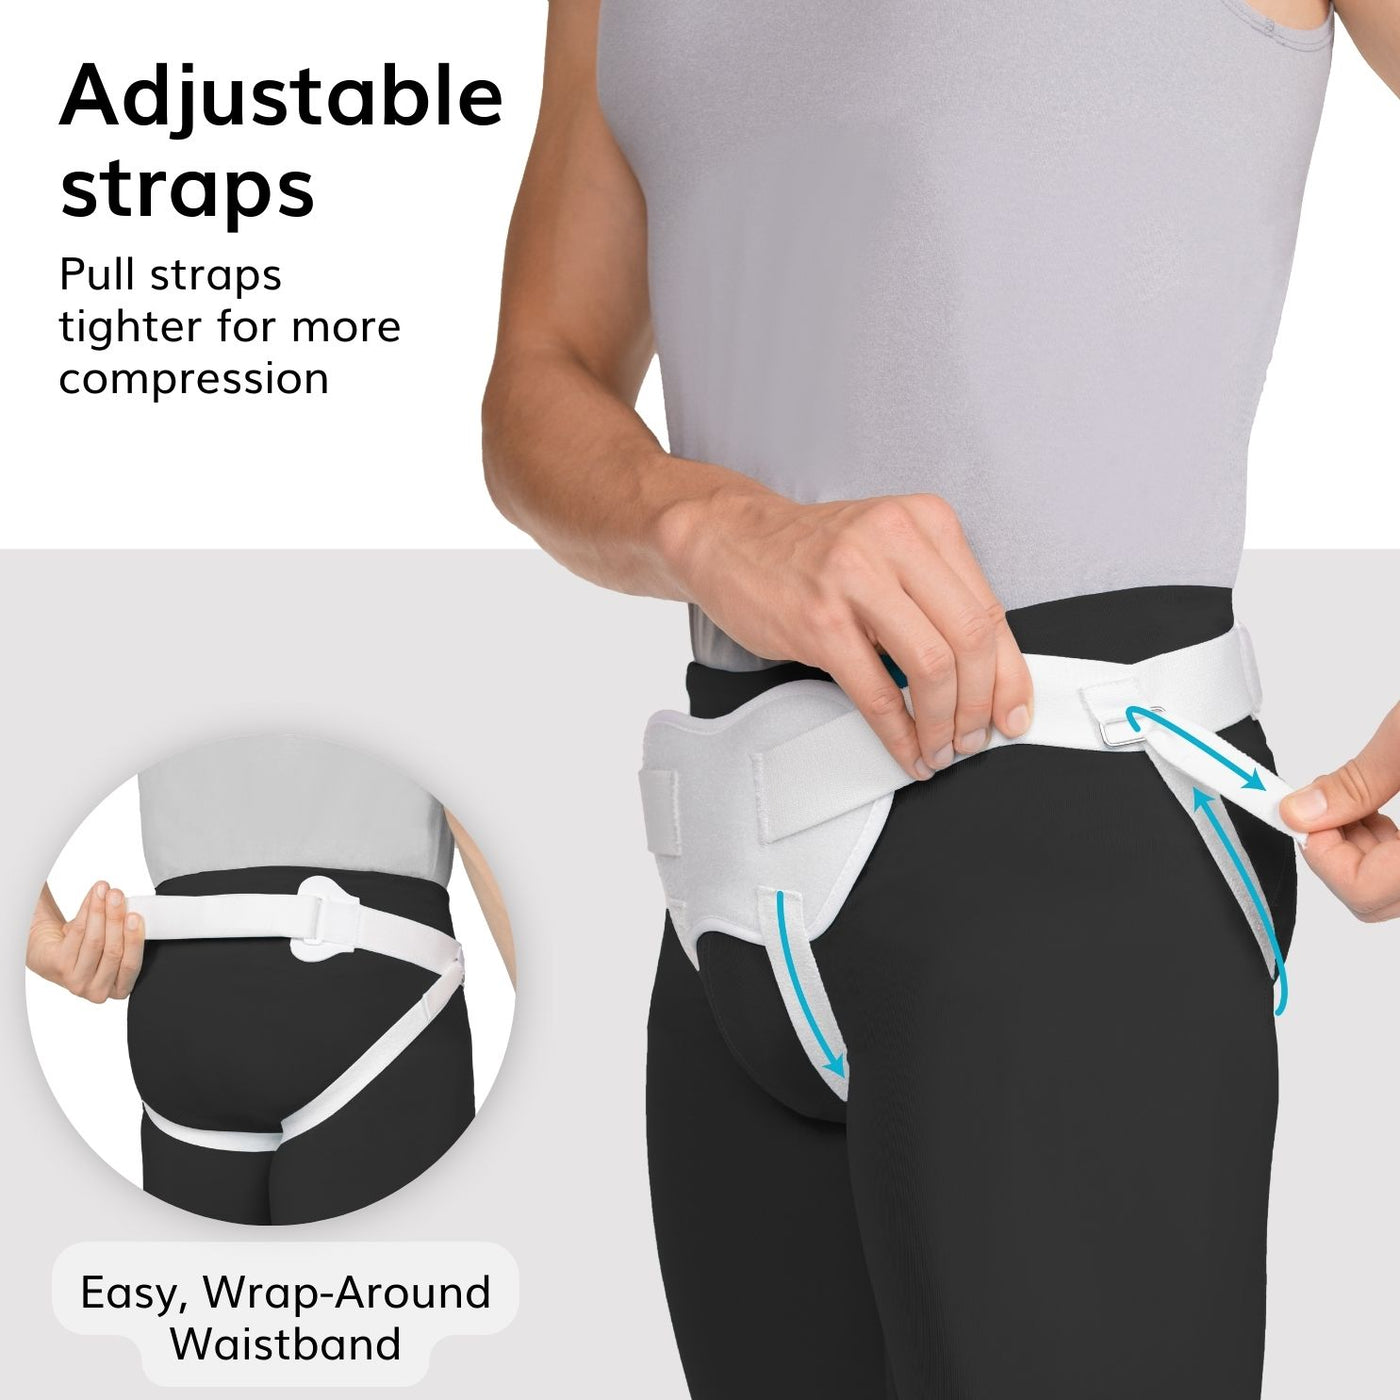 The inguinal hernia truss belt has adjustable straps for a comfortable fit